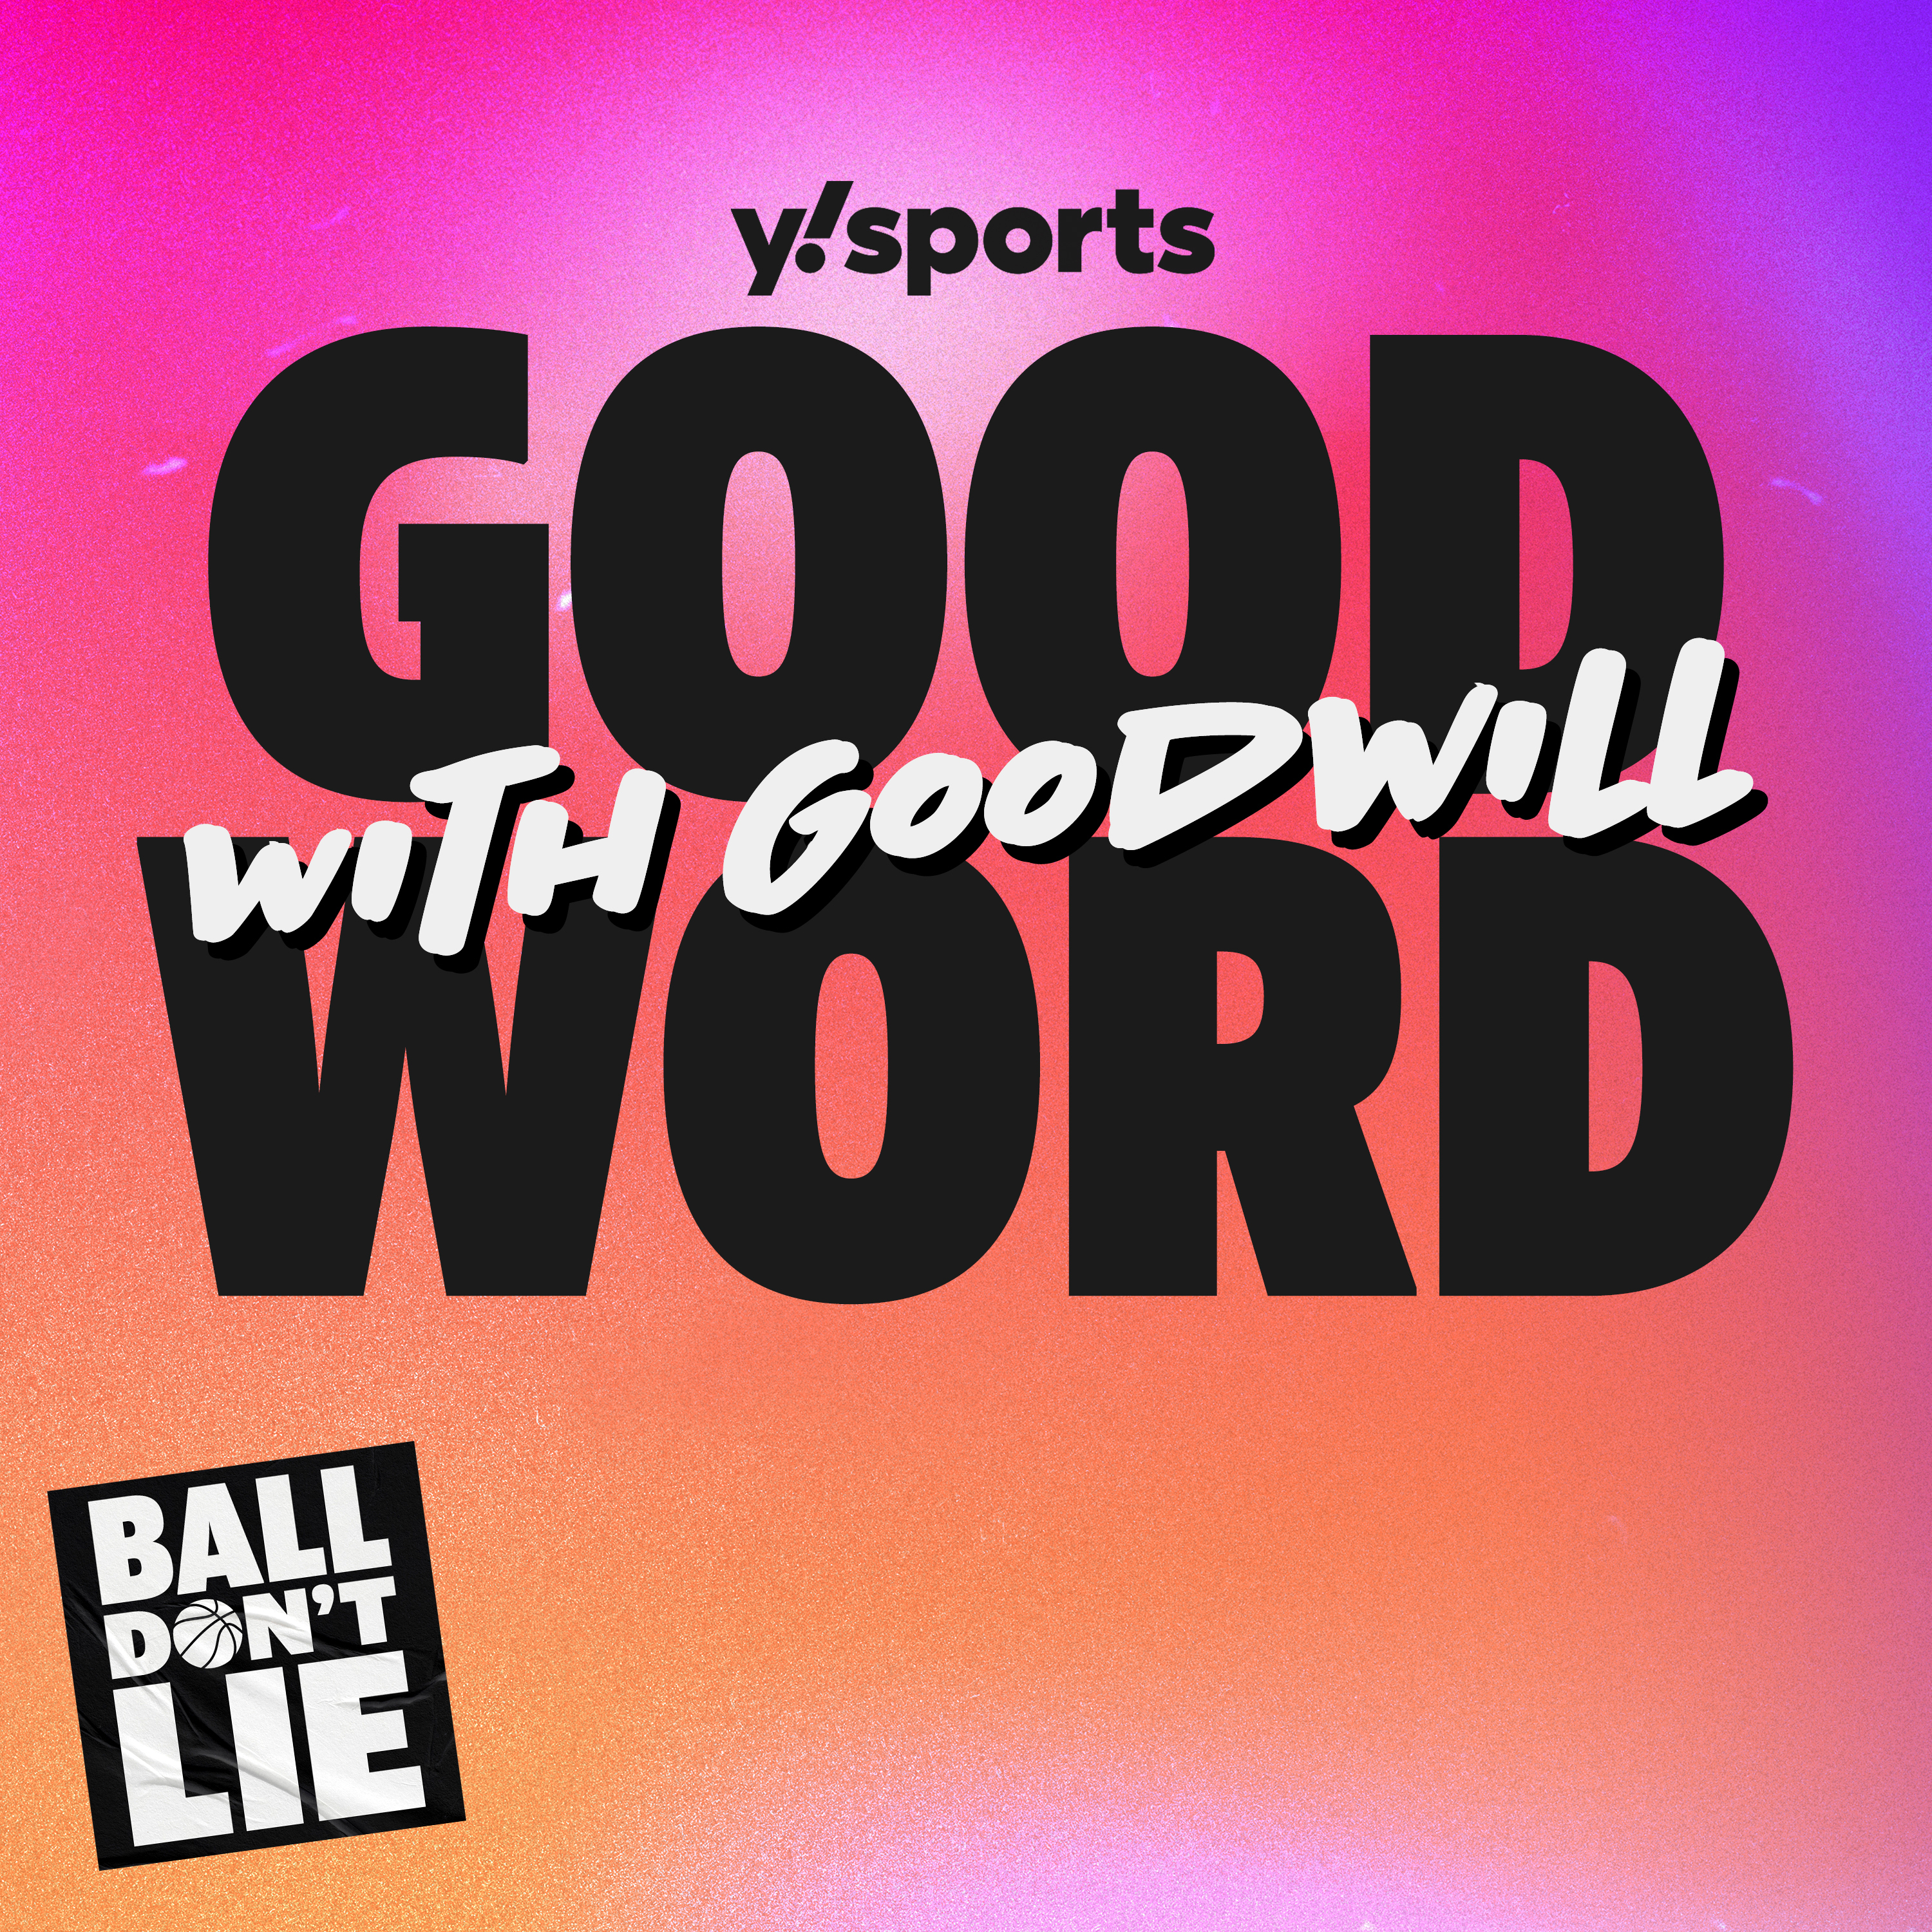 A difficult playoff path for the Lakers & Warriors, Kyrie's game-winner and All-NBA talk | Good Word with Goodwill